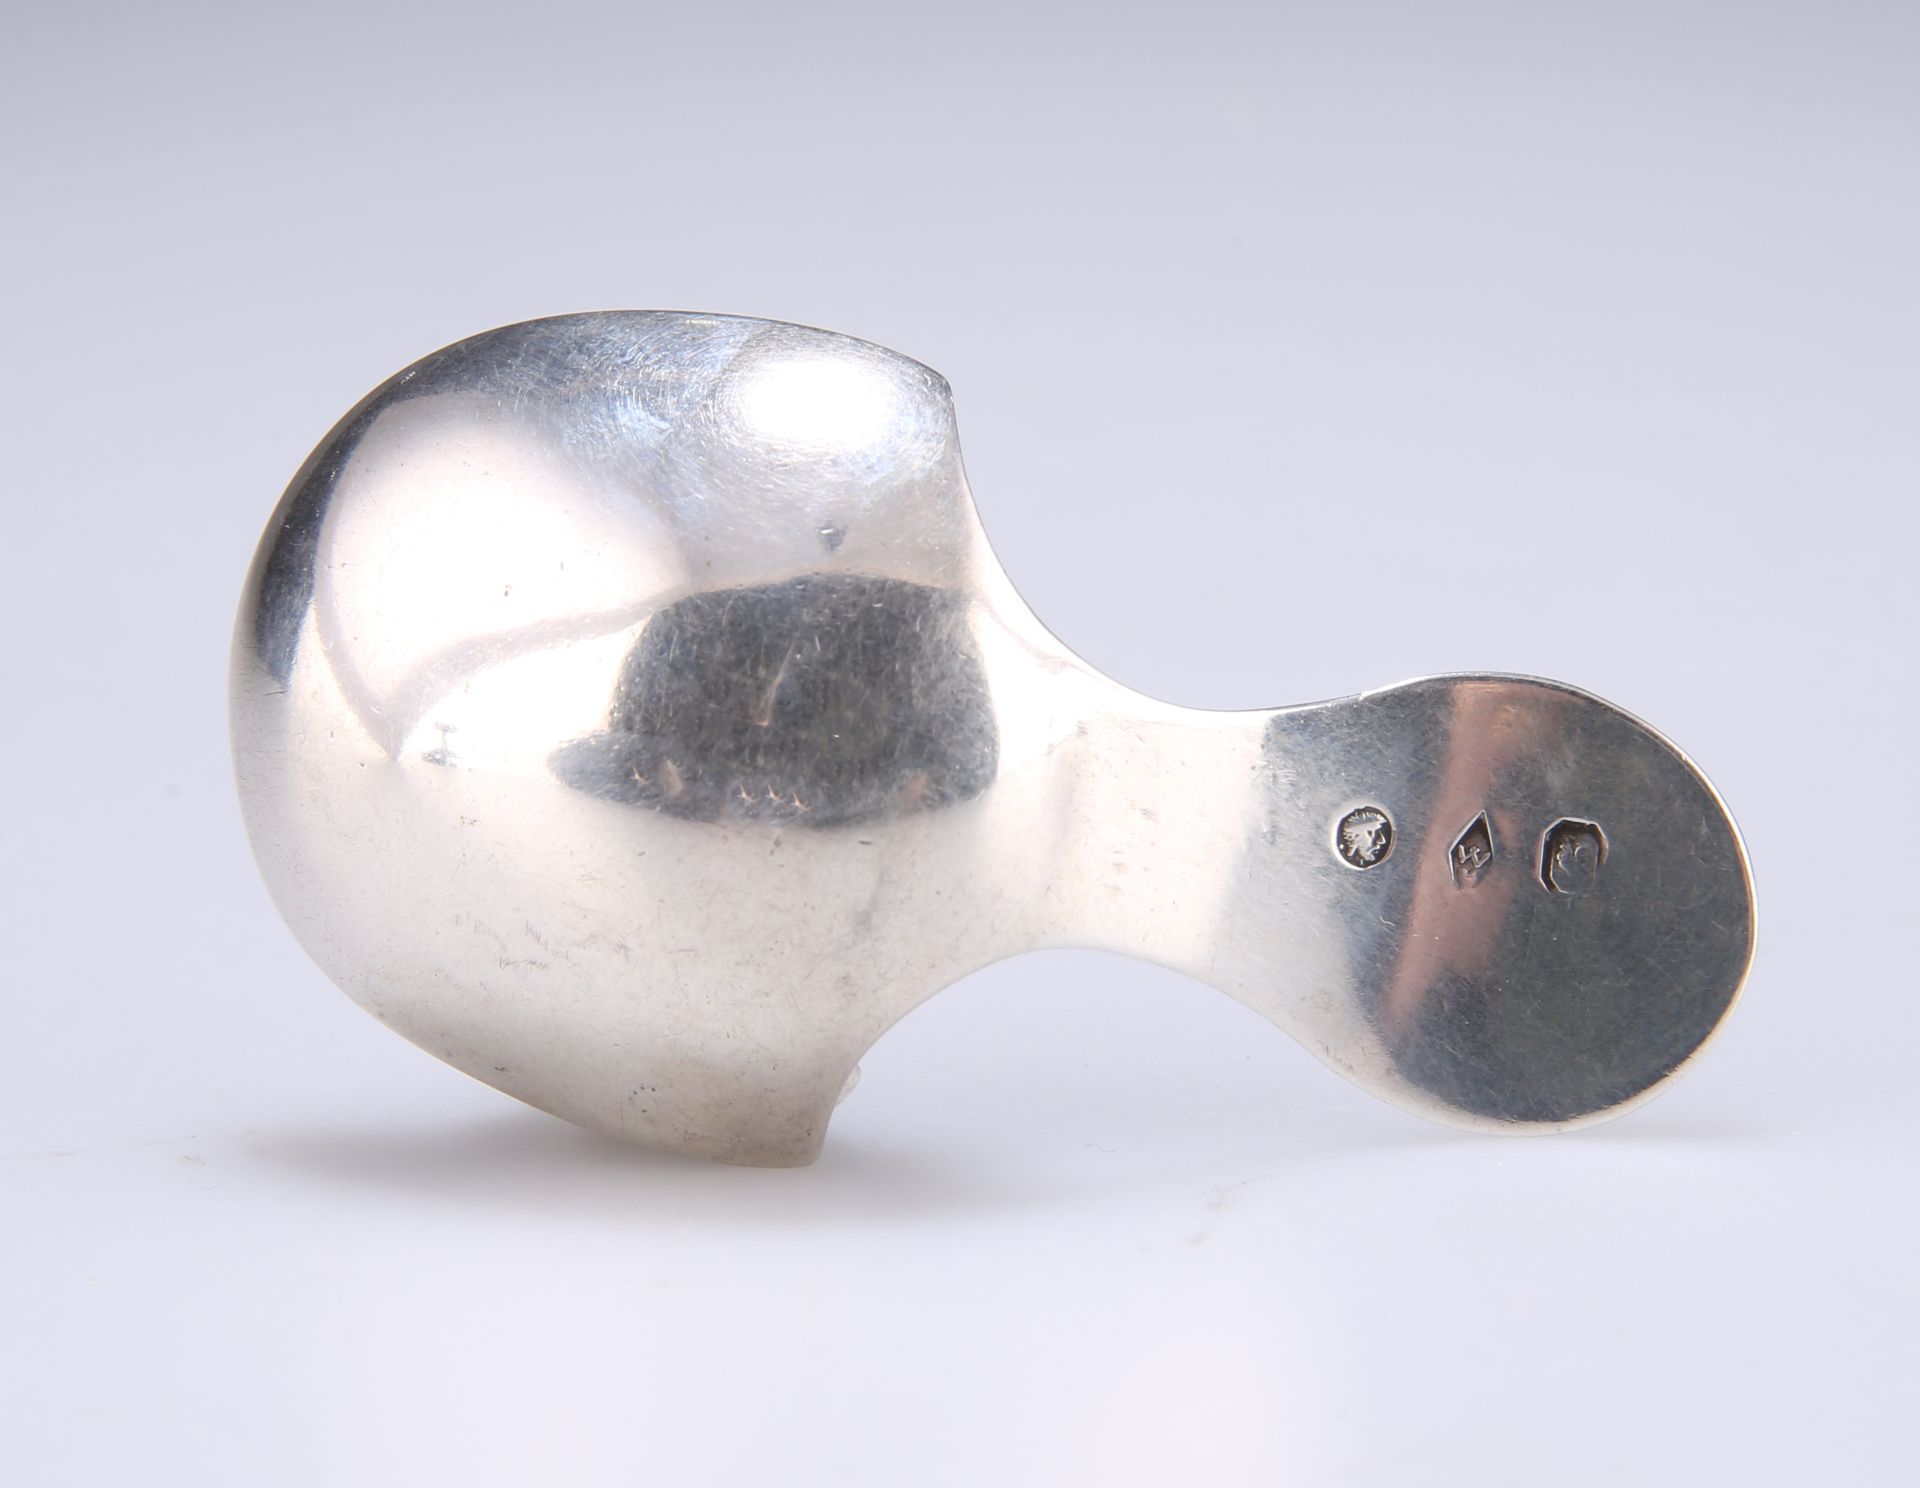 A FRENCH SILVER CADDY SPOON, EARLY 19TH CENTURY - Image 2 of 2